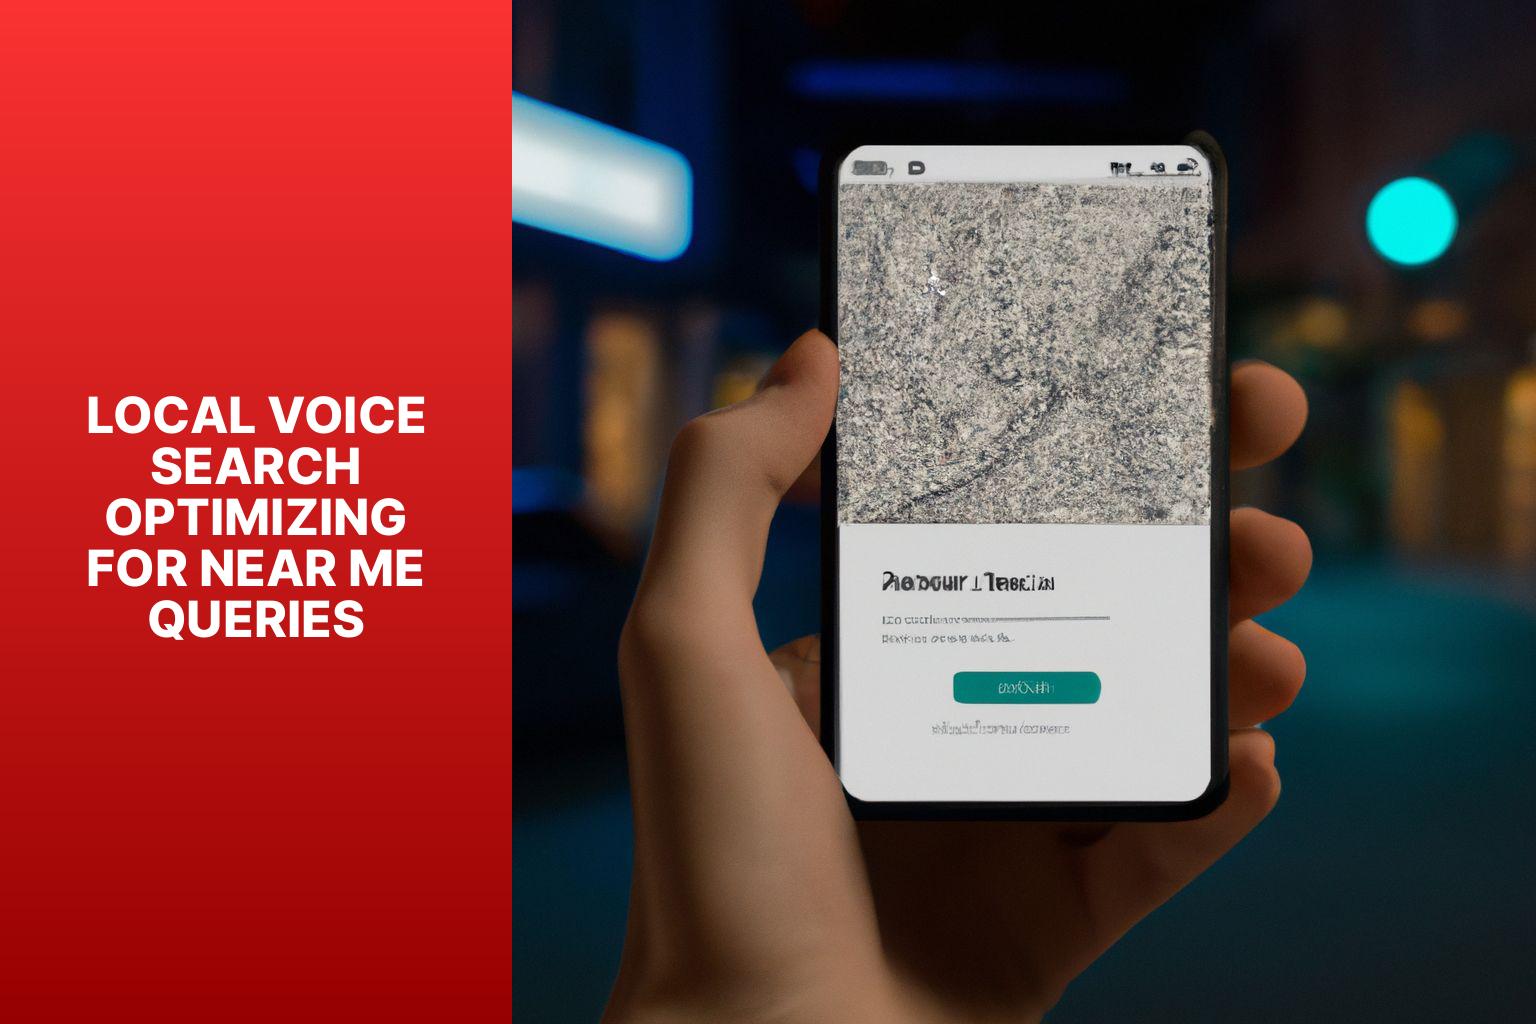 Local Voice Search Optimizing for Near Me Queries